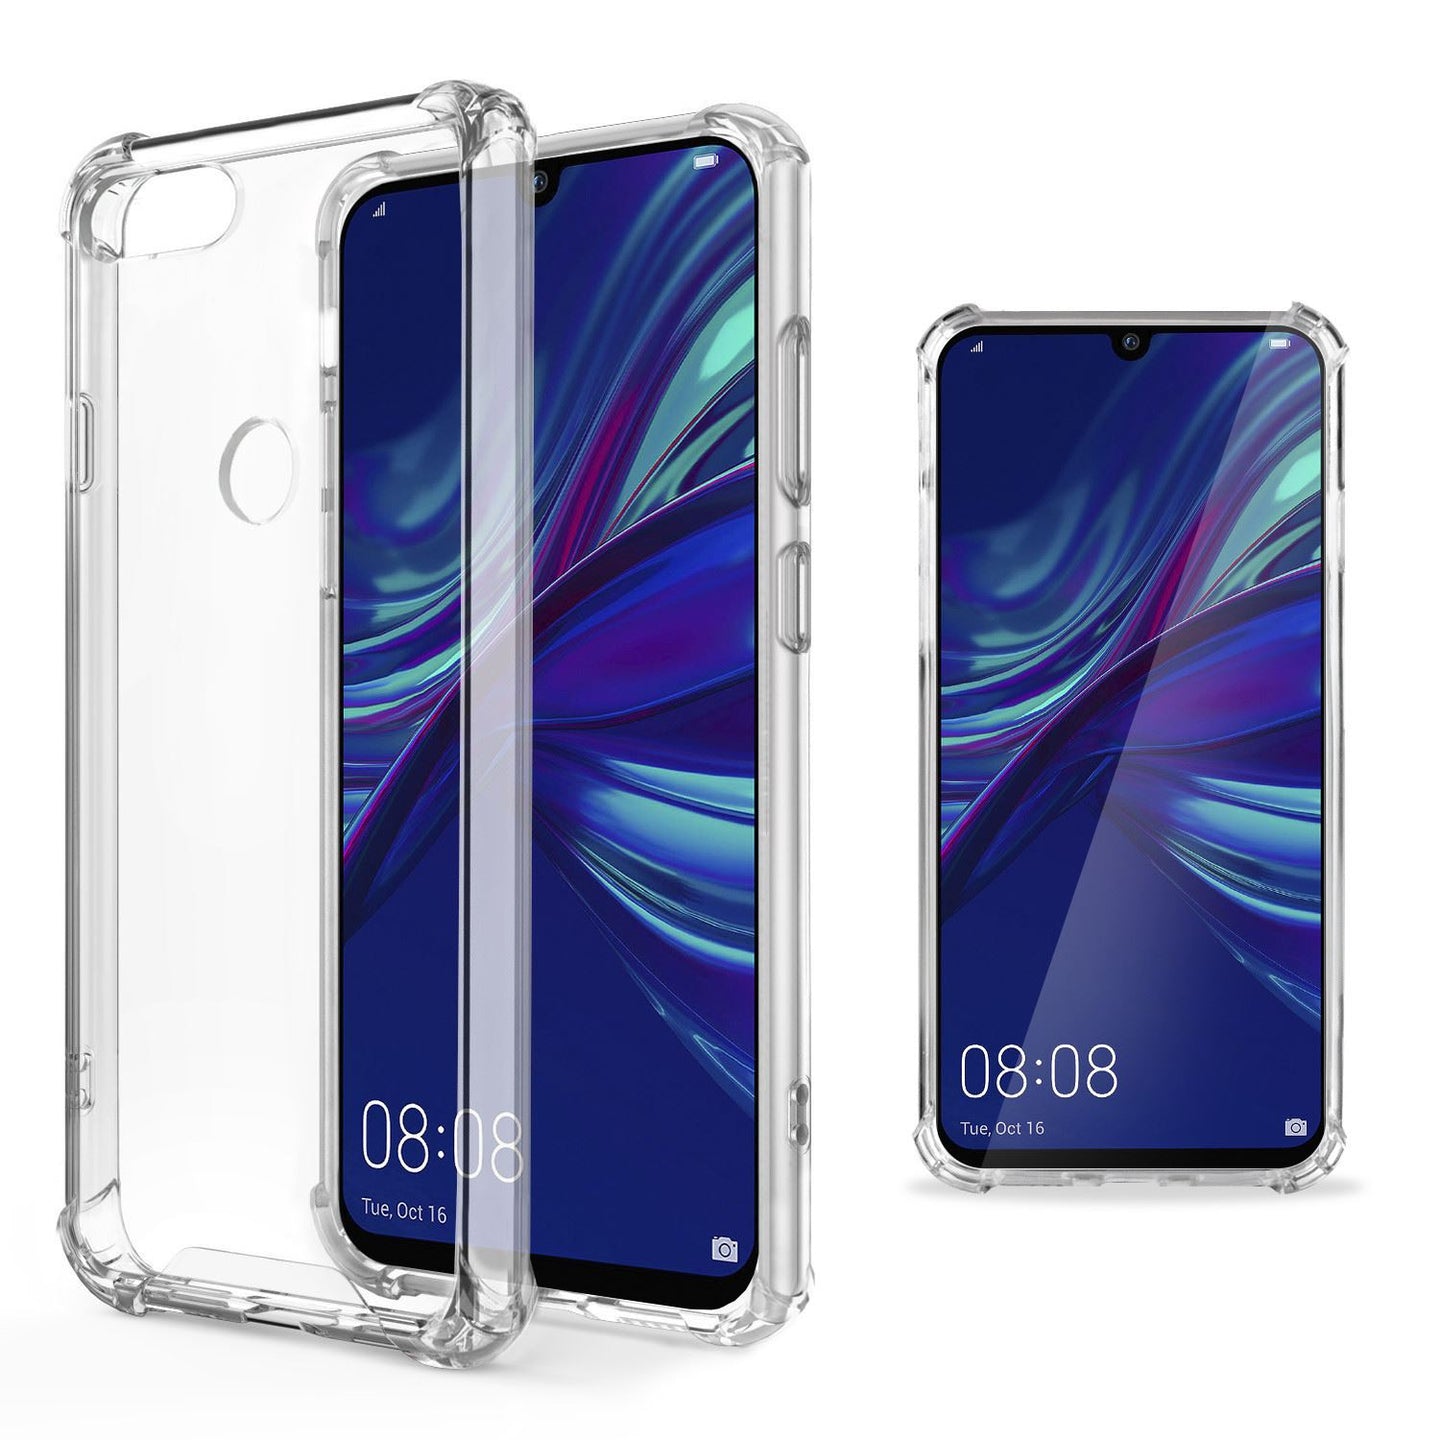 Moozy Shock Proof Silicone Case for Huawei P Smart 2019, Honor 10 Lite - Transparent Crystal Clear Phone Case Soft TPU Cover